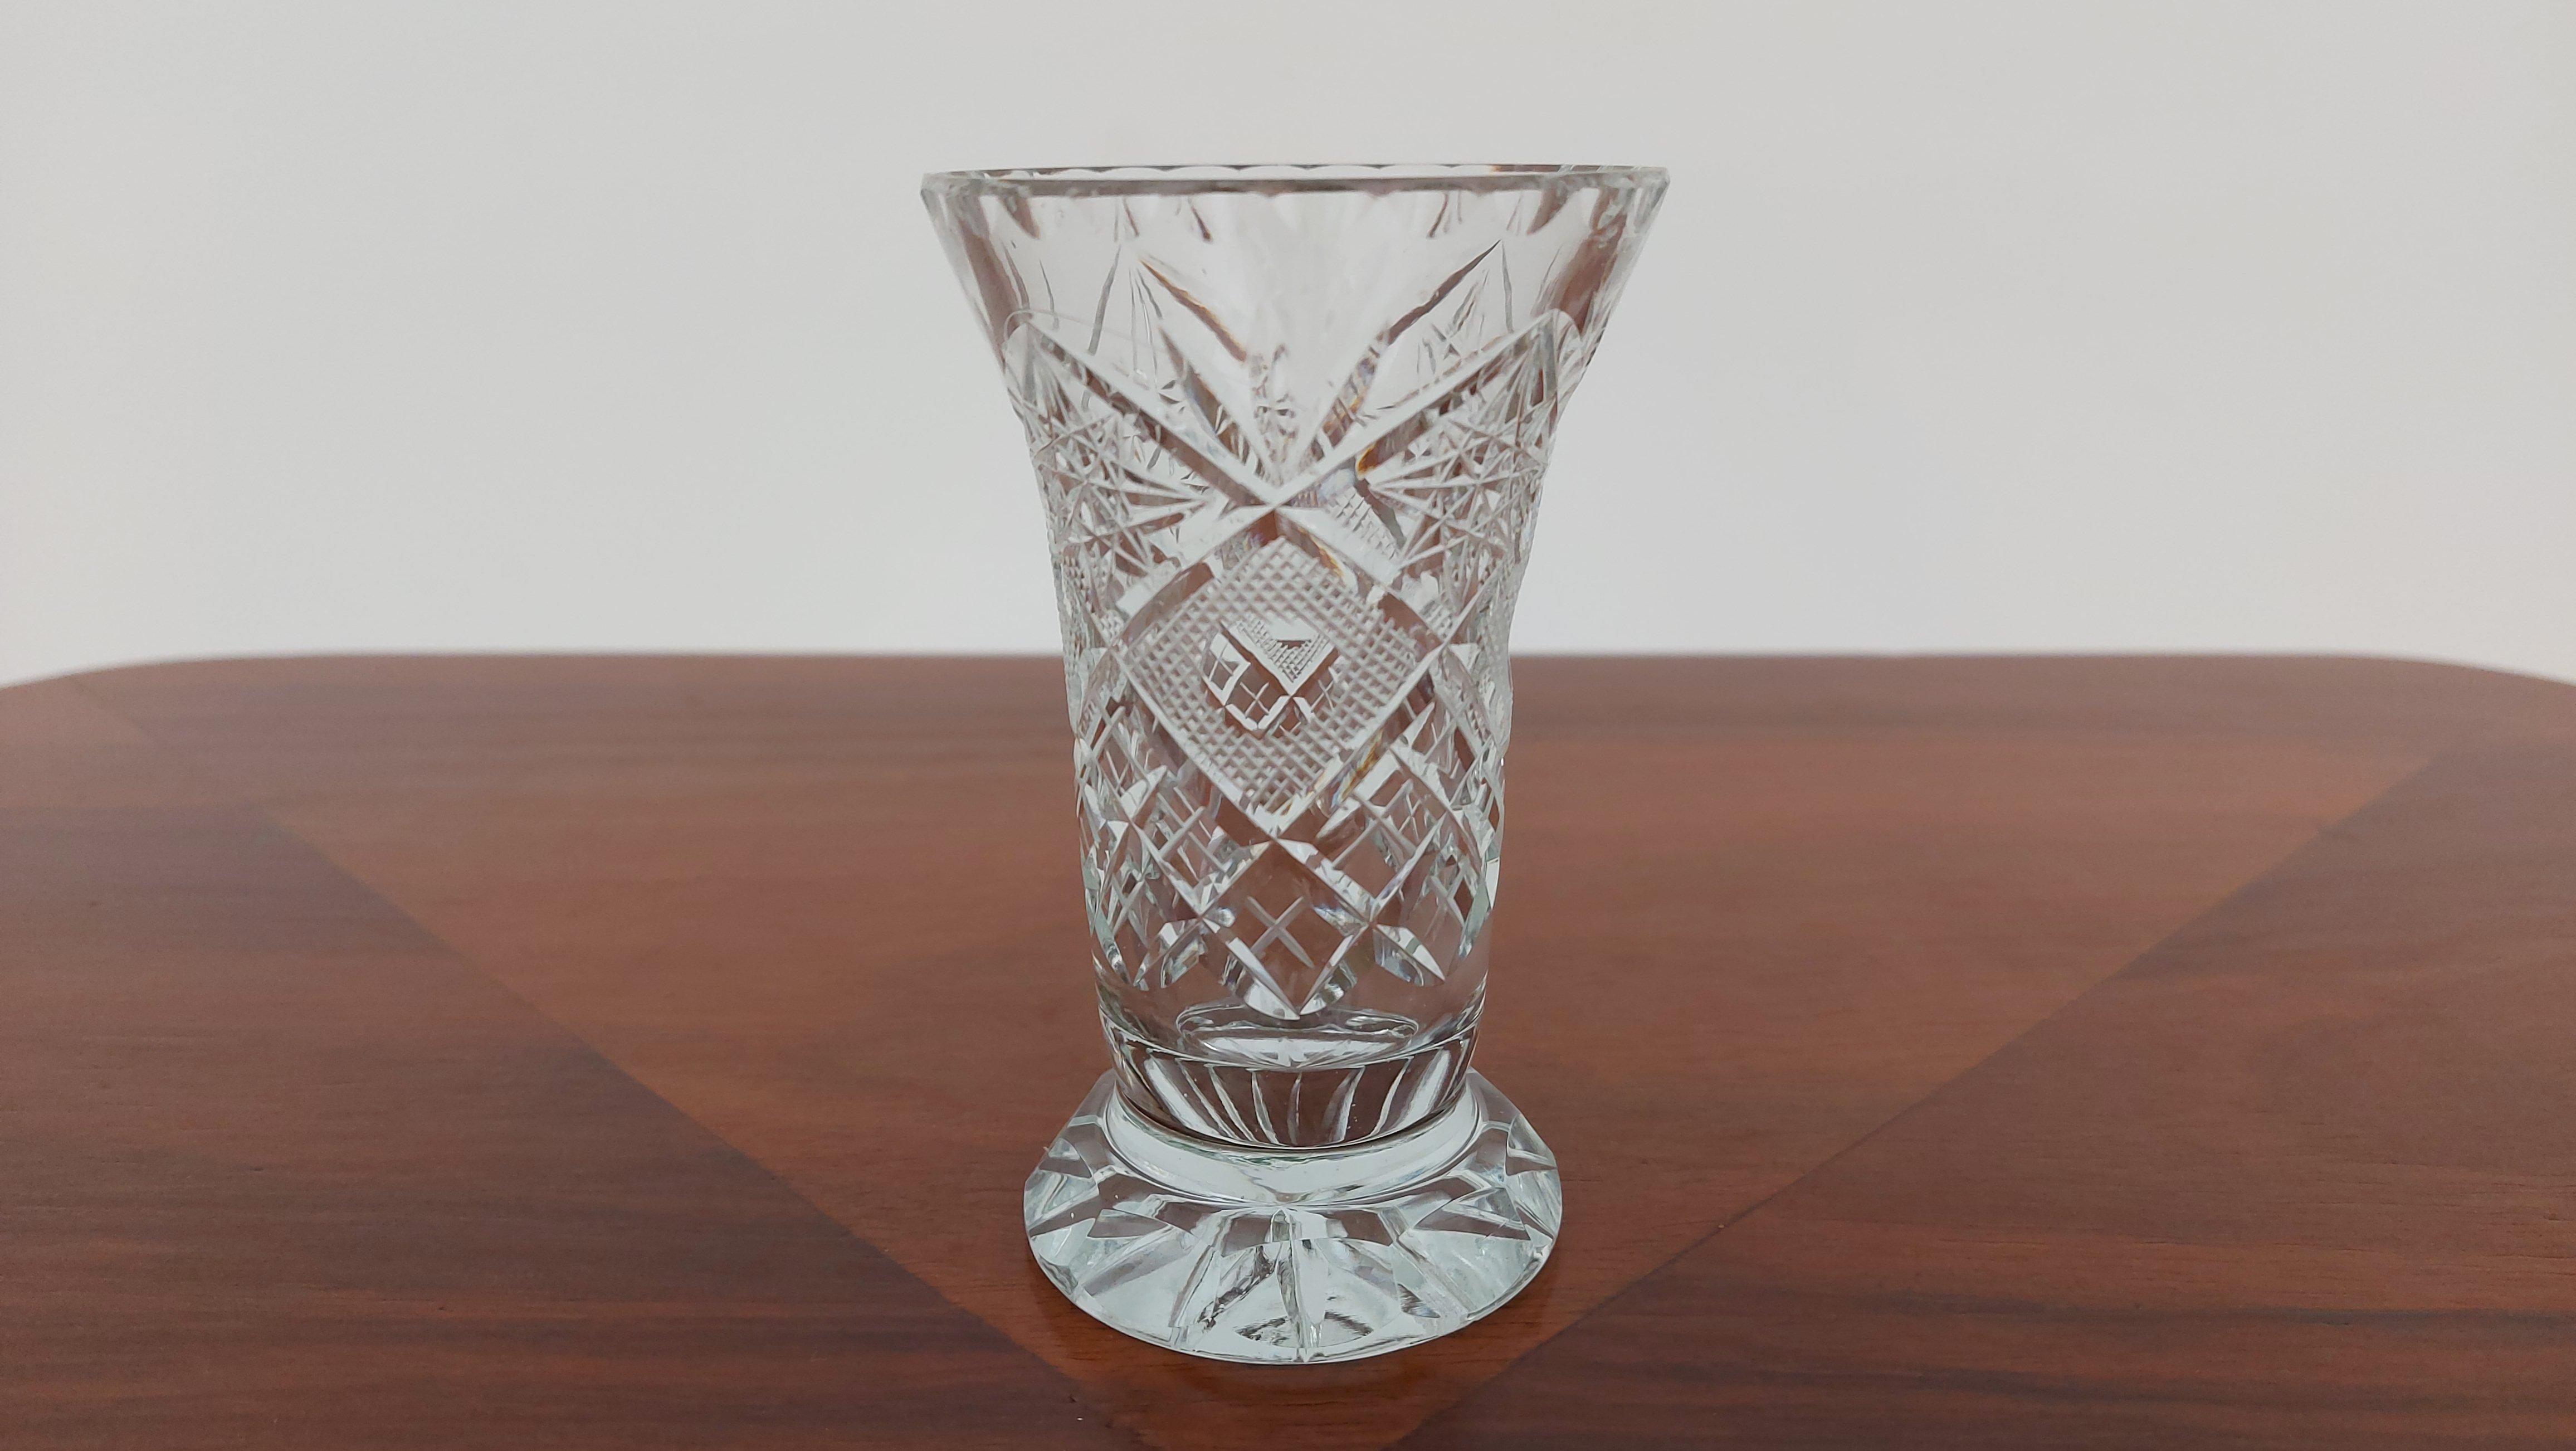 A small vase made of crystal. The vase was produced in Poland in the 1960s and 1970s.

Vase in very good condition

Height 10.5 cm / diameter 7 cm.